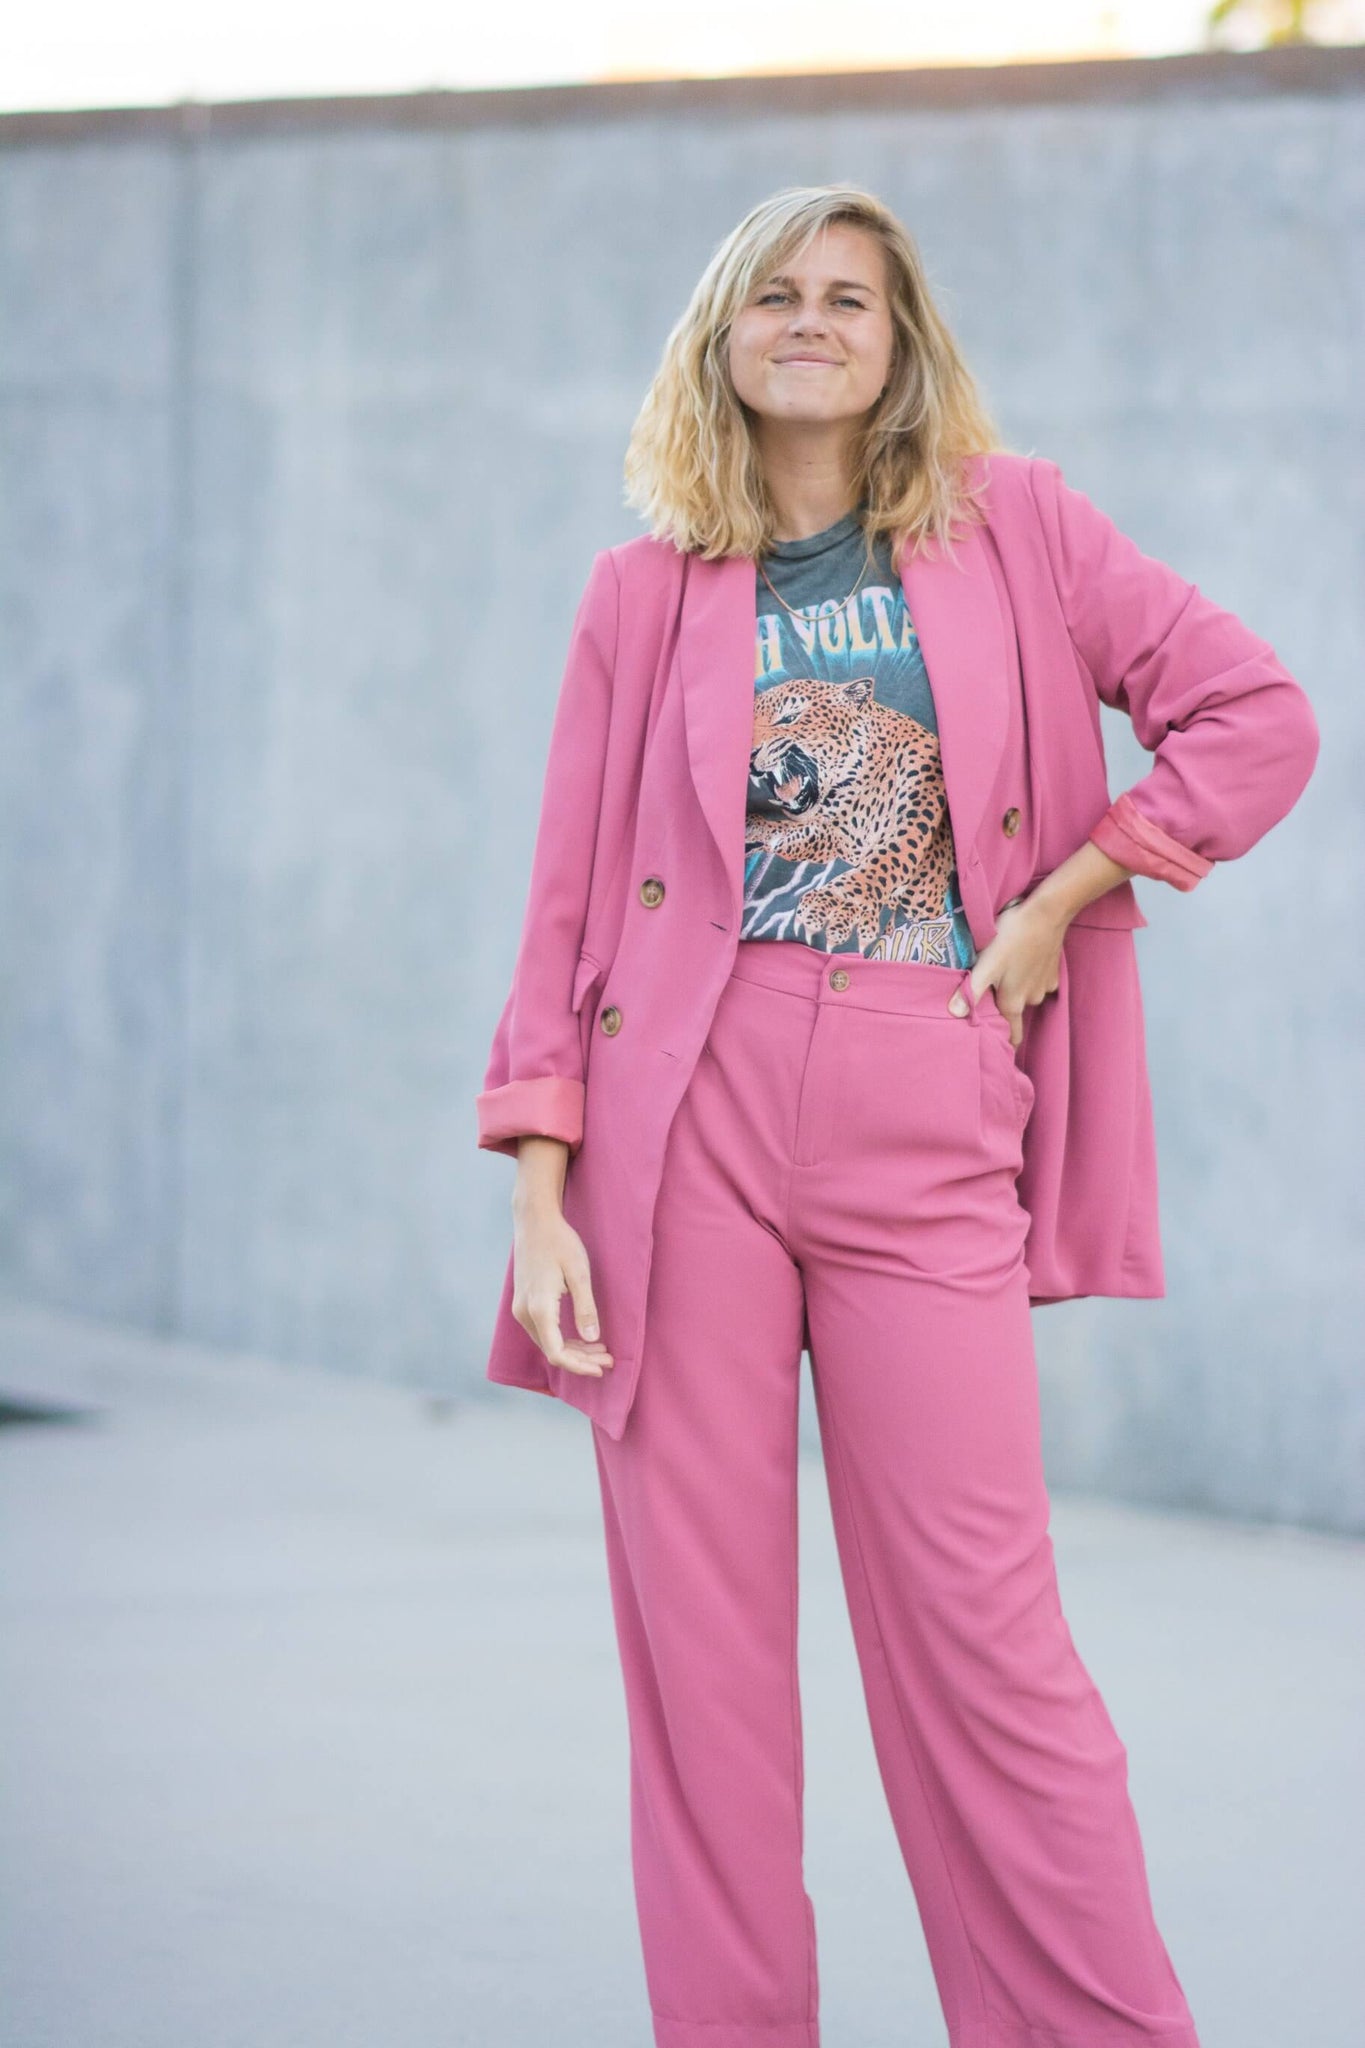 NY WEEKEND PINK SUIT KITS BRAND  affordable Womens and Mens trendy online streetwear fashion boutique 